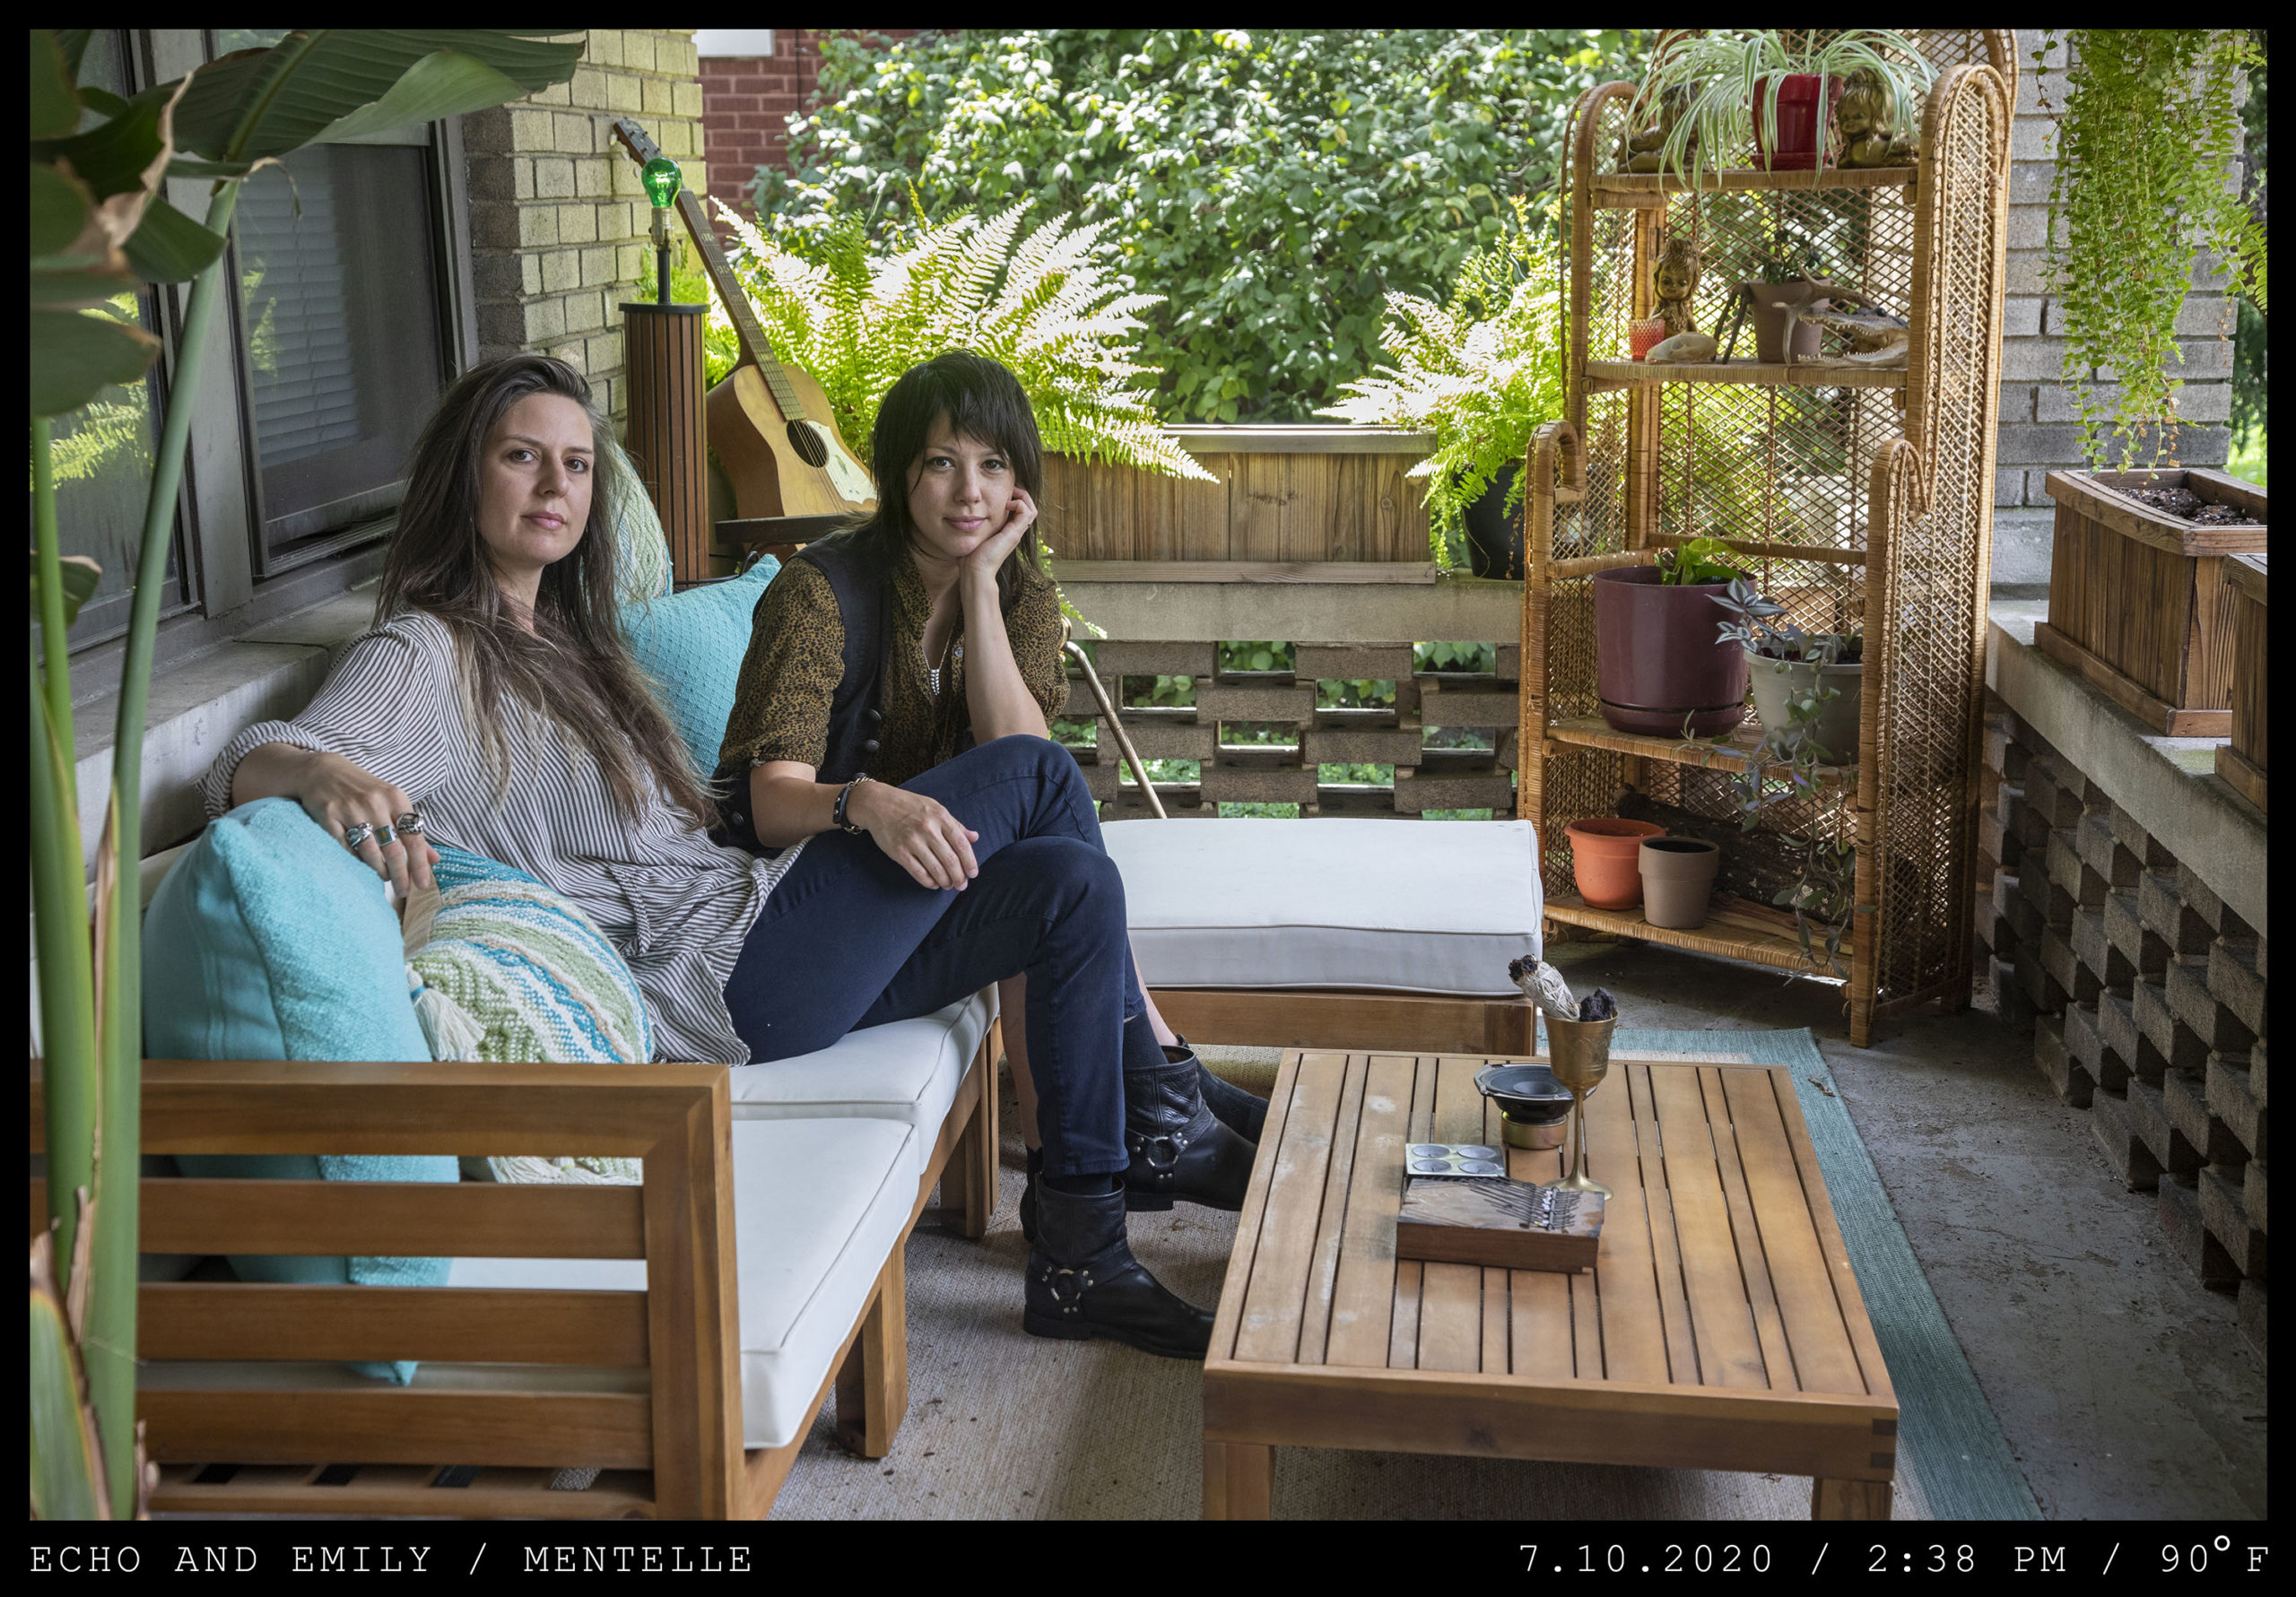 Two women with long dark hair, one with bangs are seated on a front porch among wooden furniture. One sits with legs crossed while the other drapes her right hand across her knee.